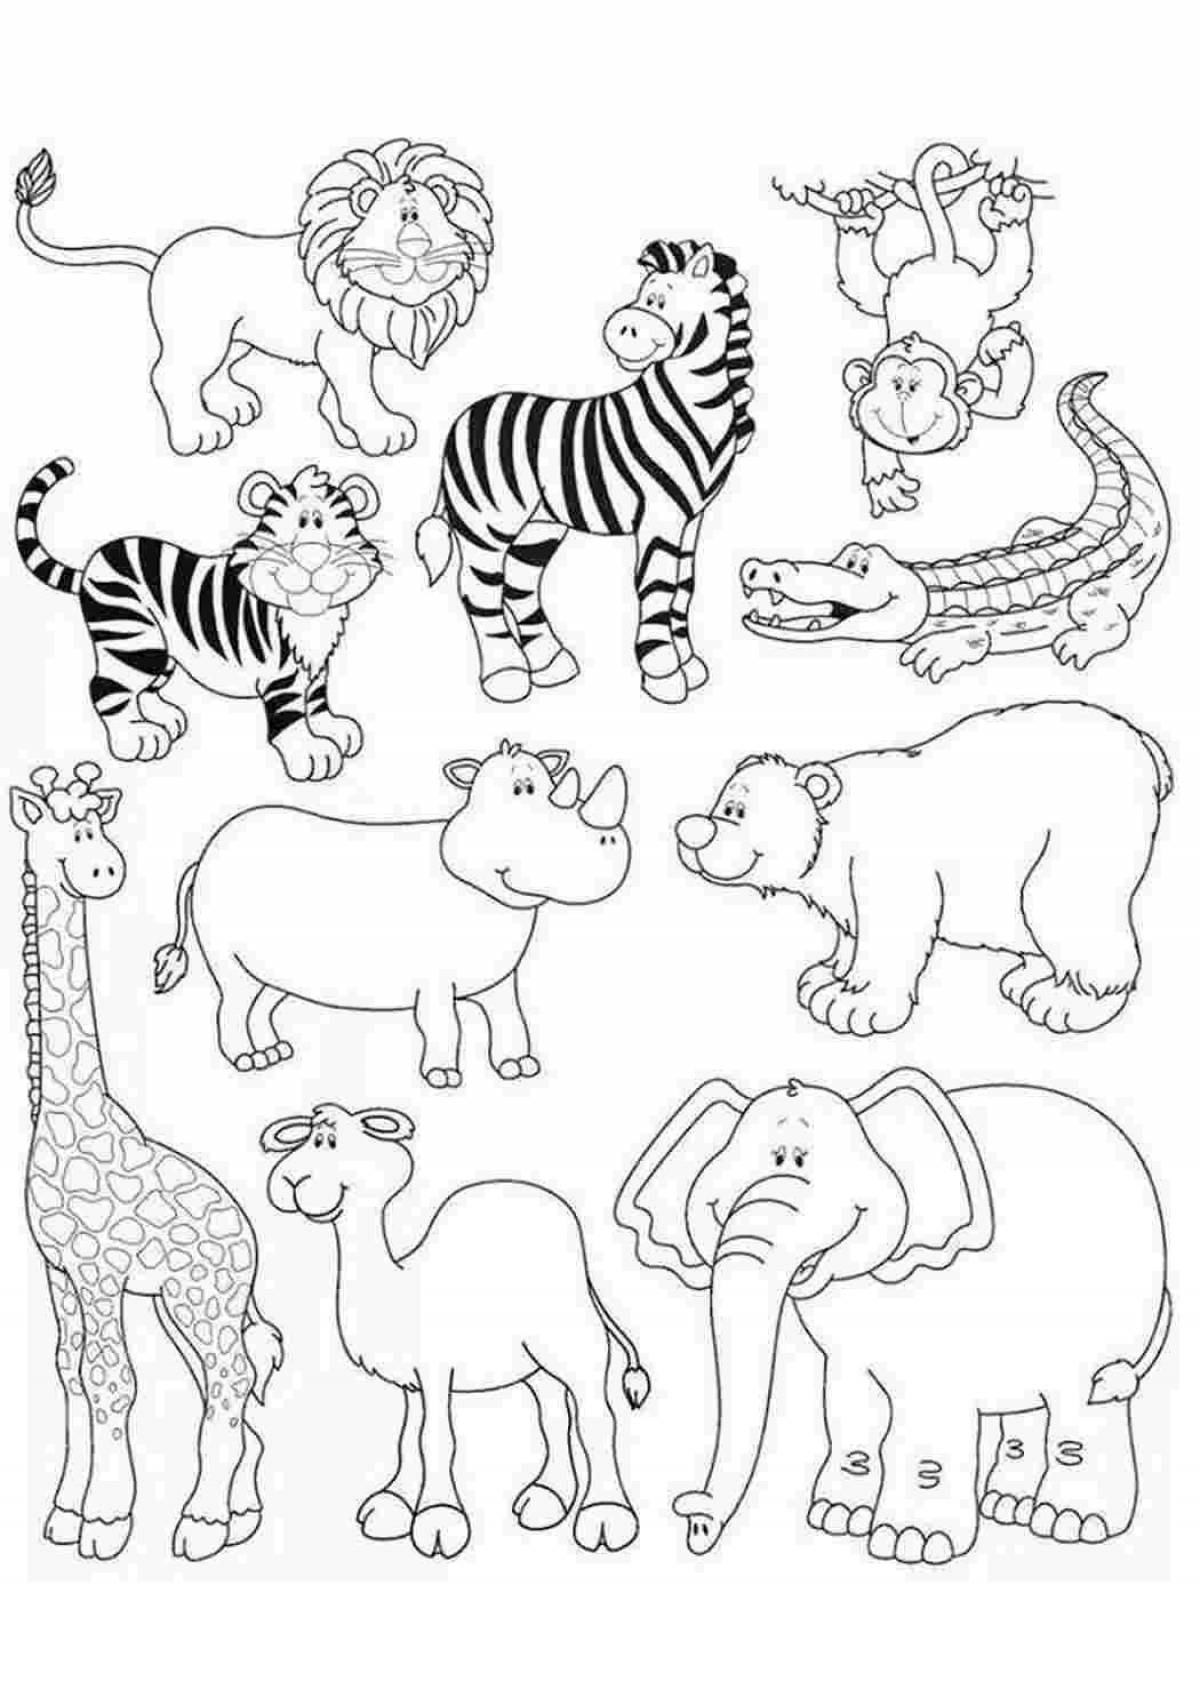 Playful coloring of animals of hot countries for preschoolers